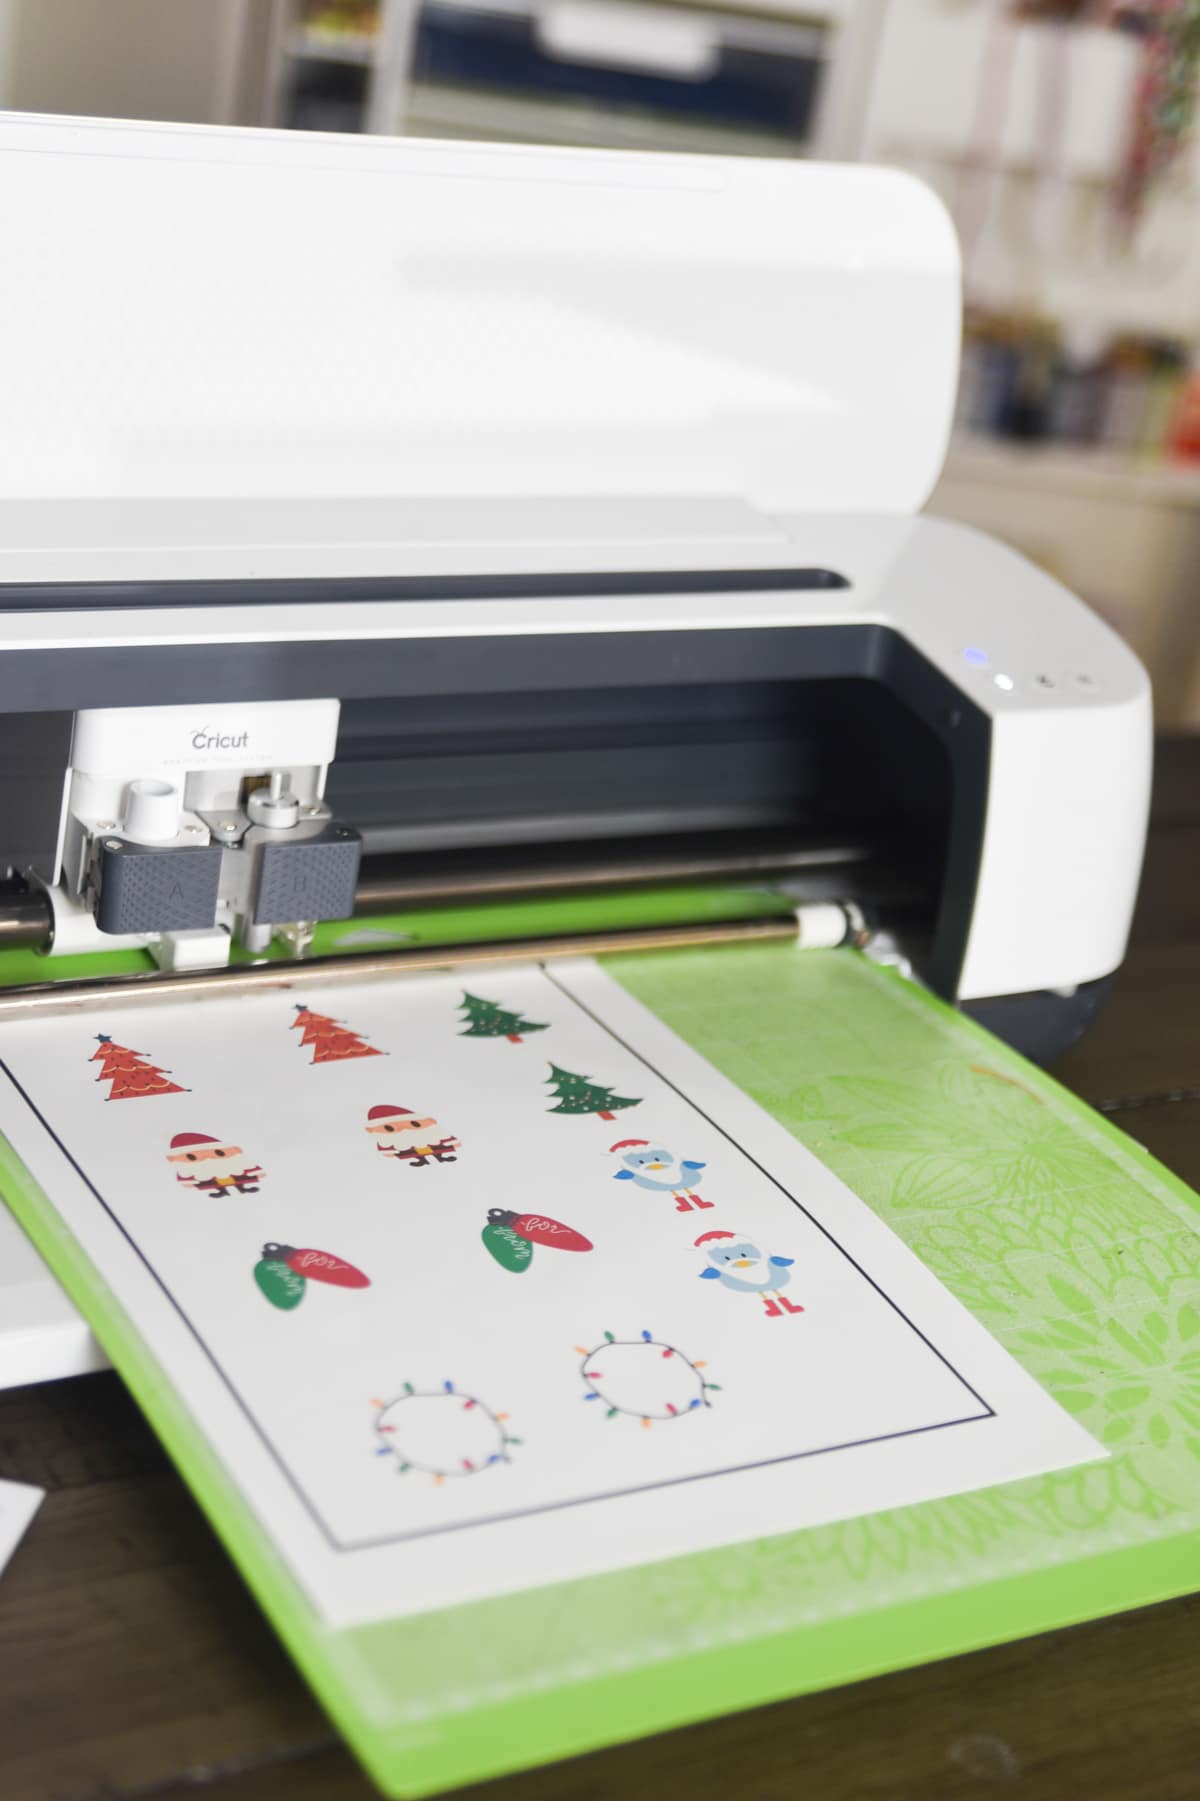 How To Print Large Words On Cricut